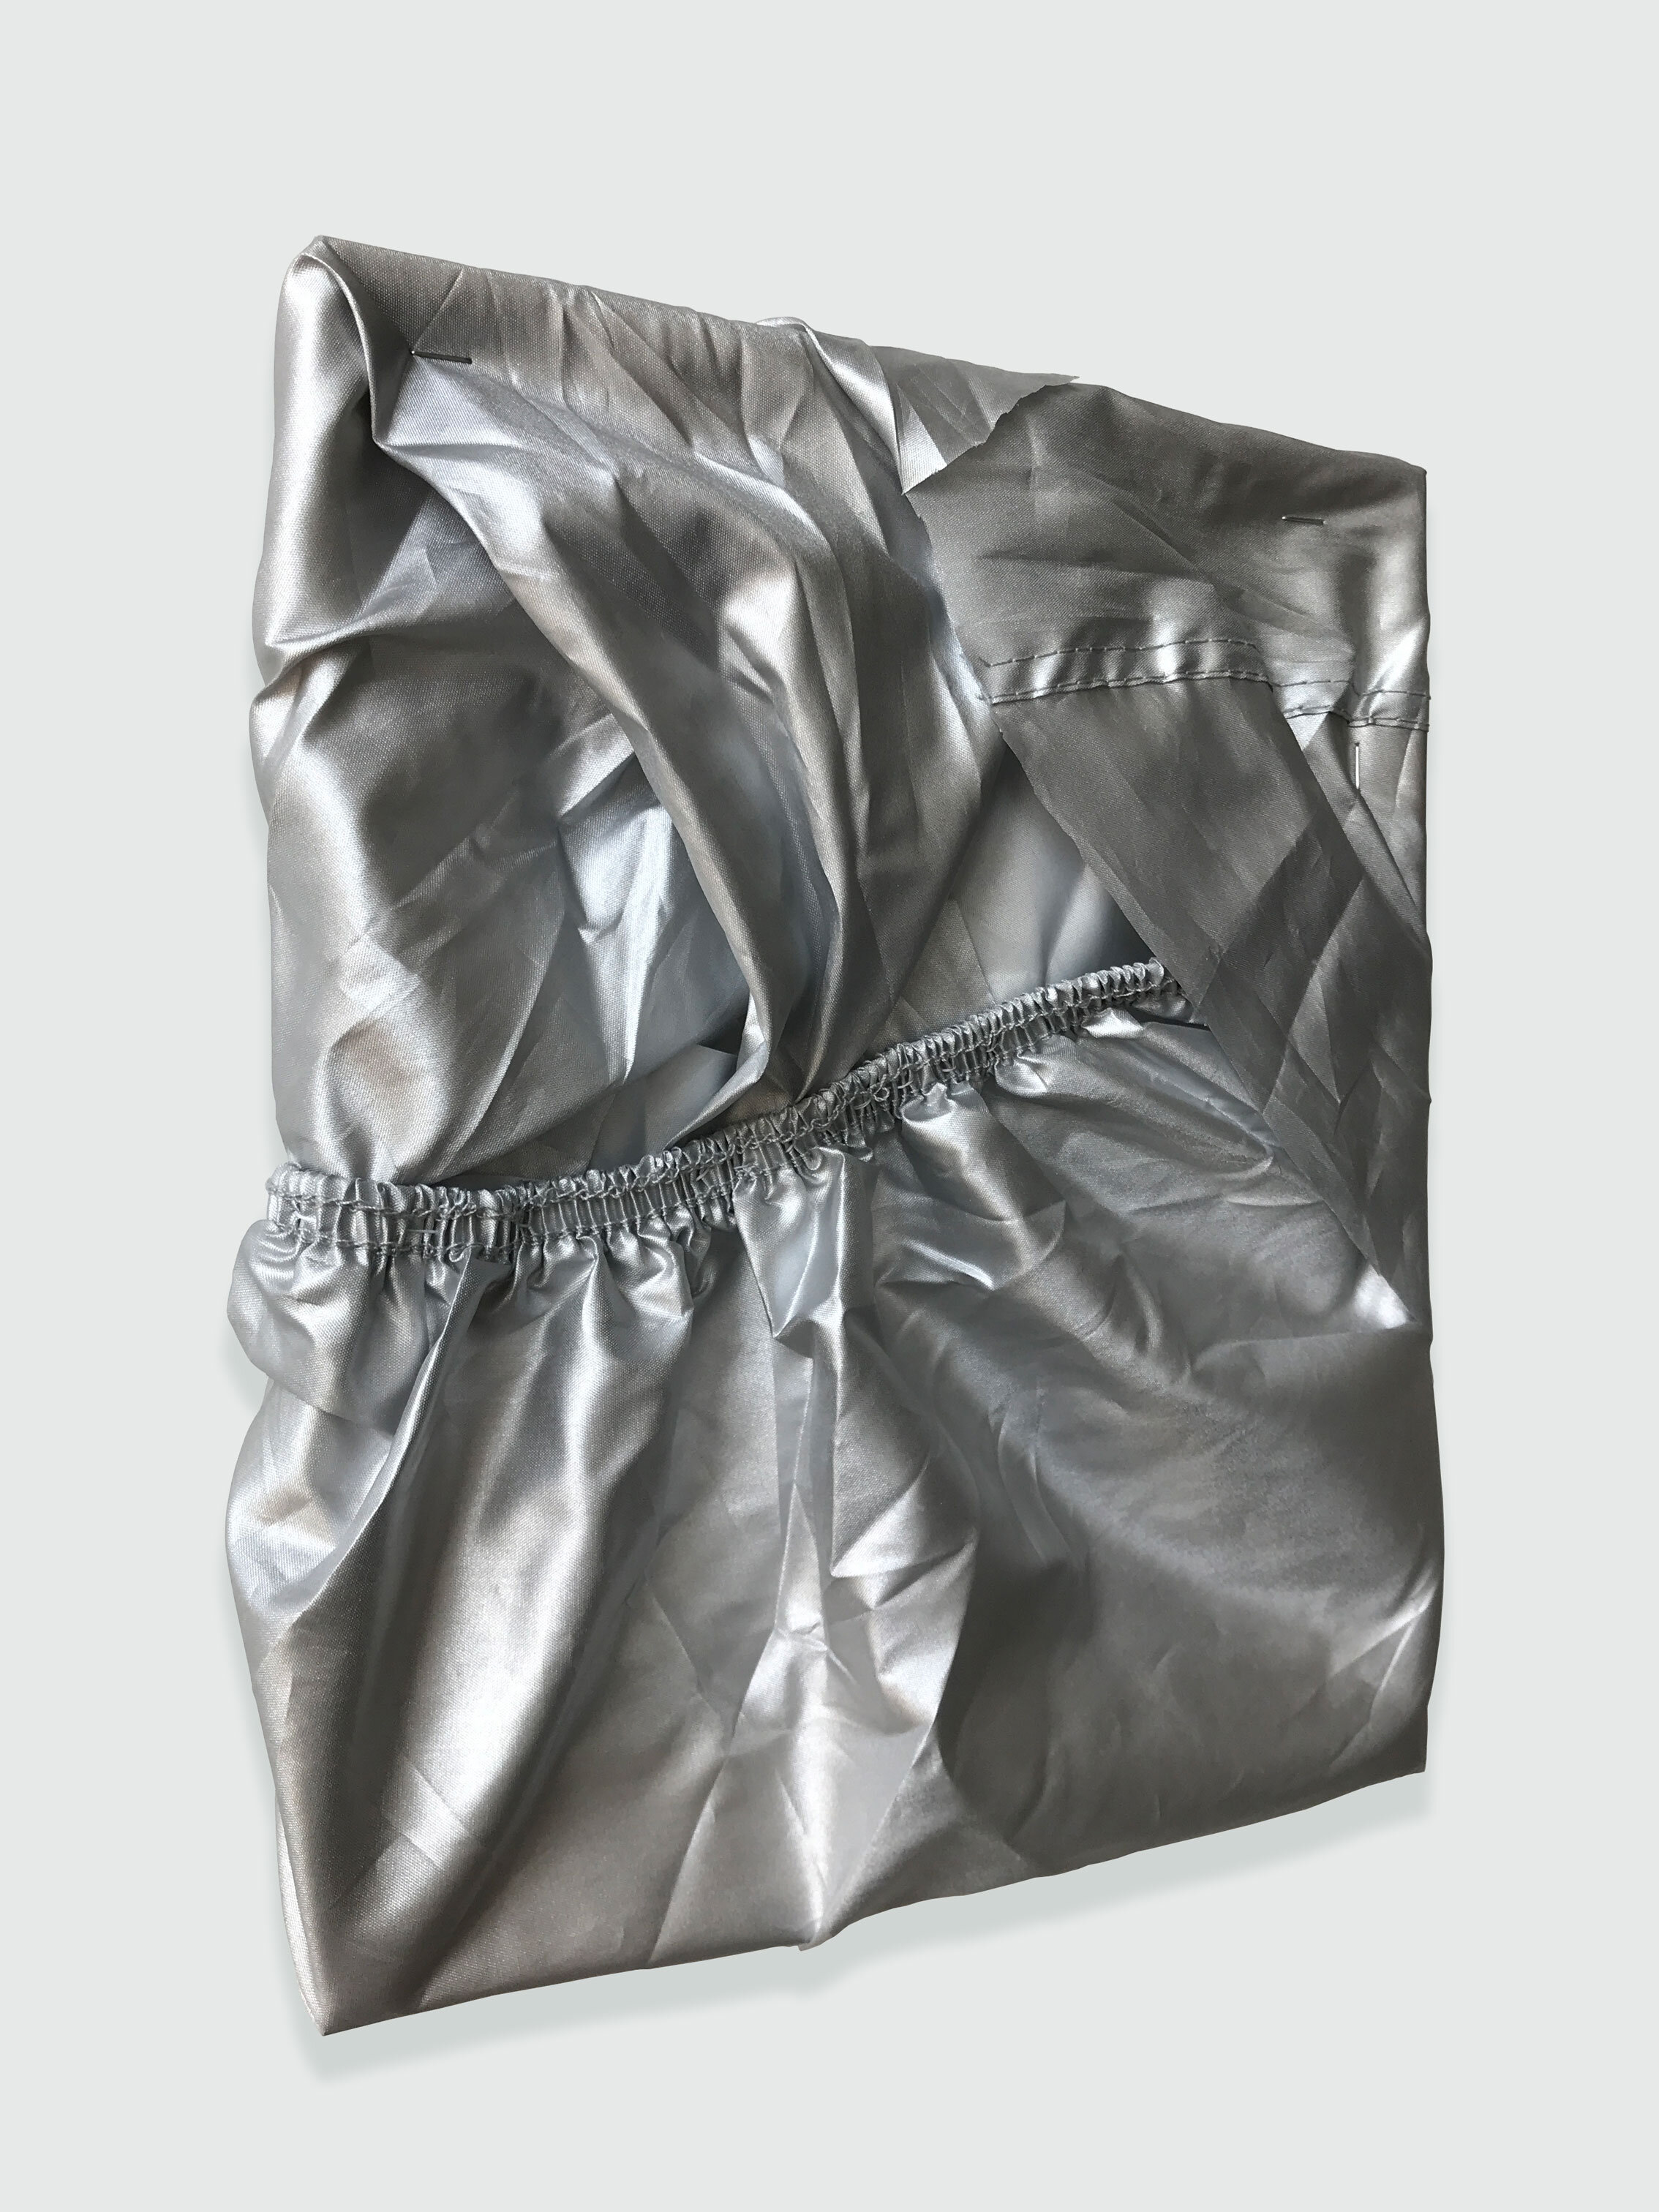  Laura Hunt,  Untitled , 2019 (side view), metallic motorcycle cover, 12 x 10 inches (edges variable). 